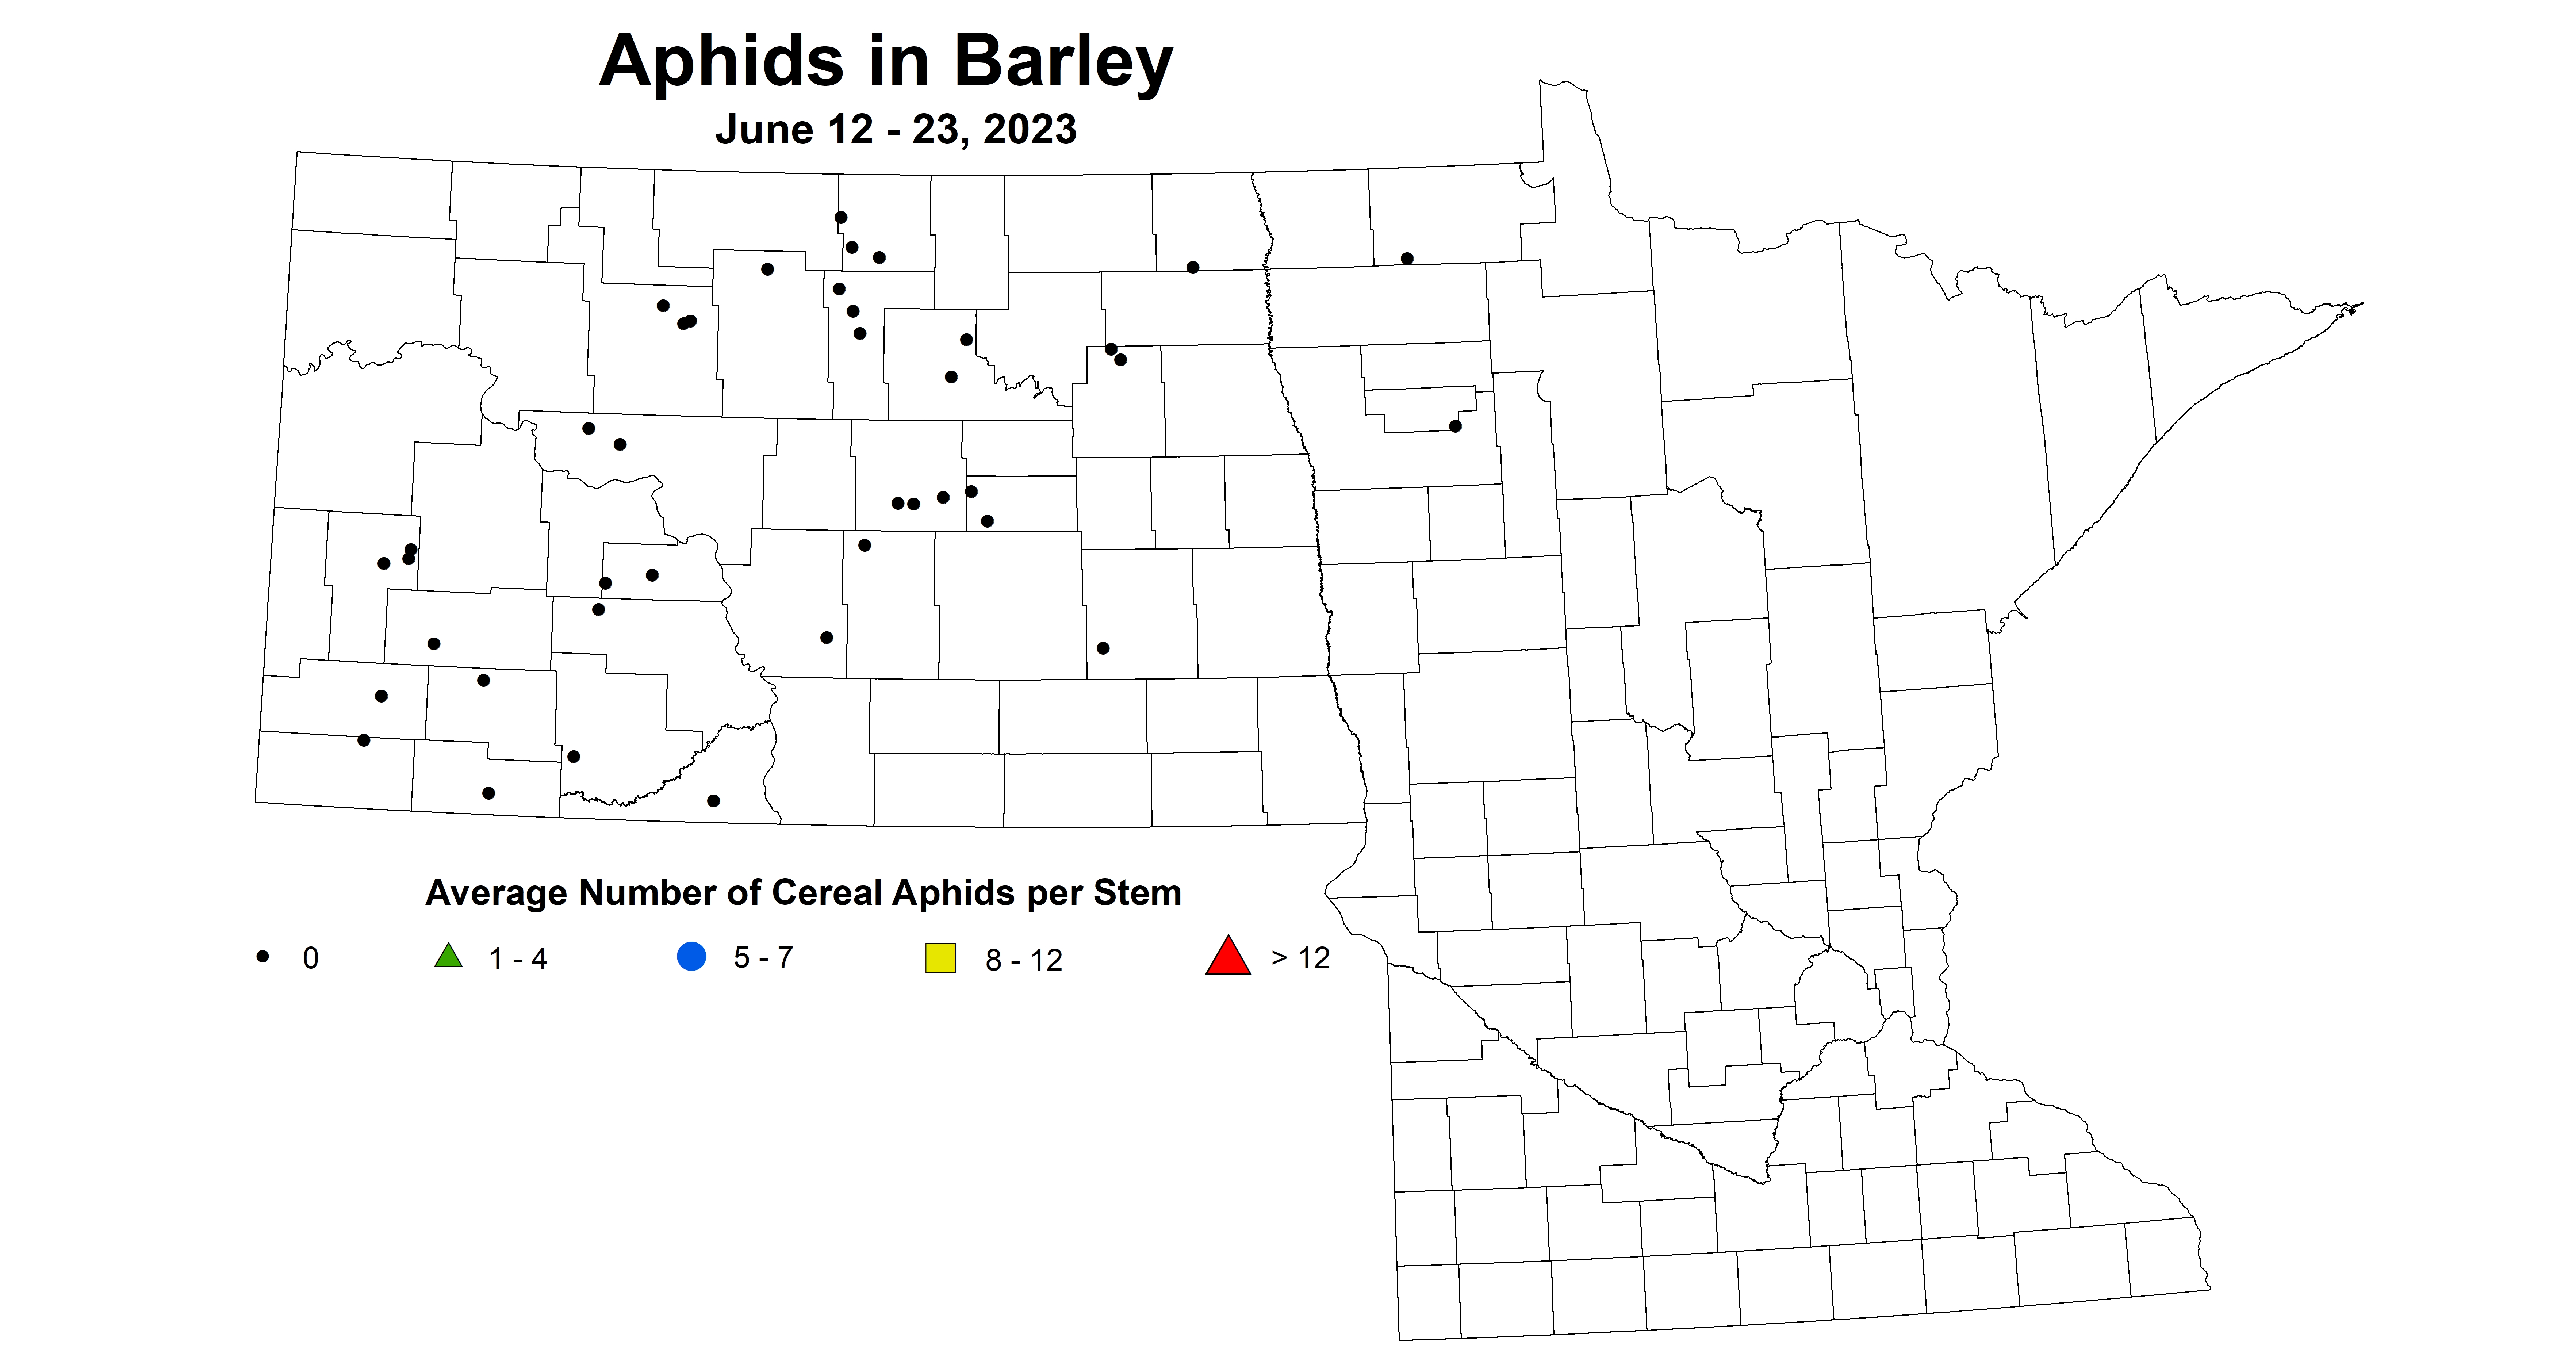 barley aphids June 12-23 2023 updated